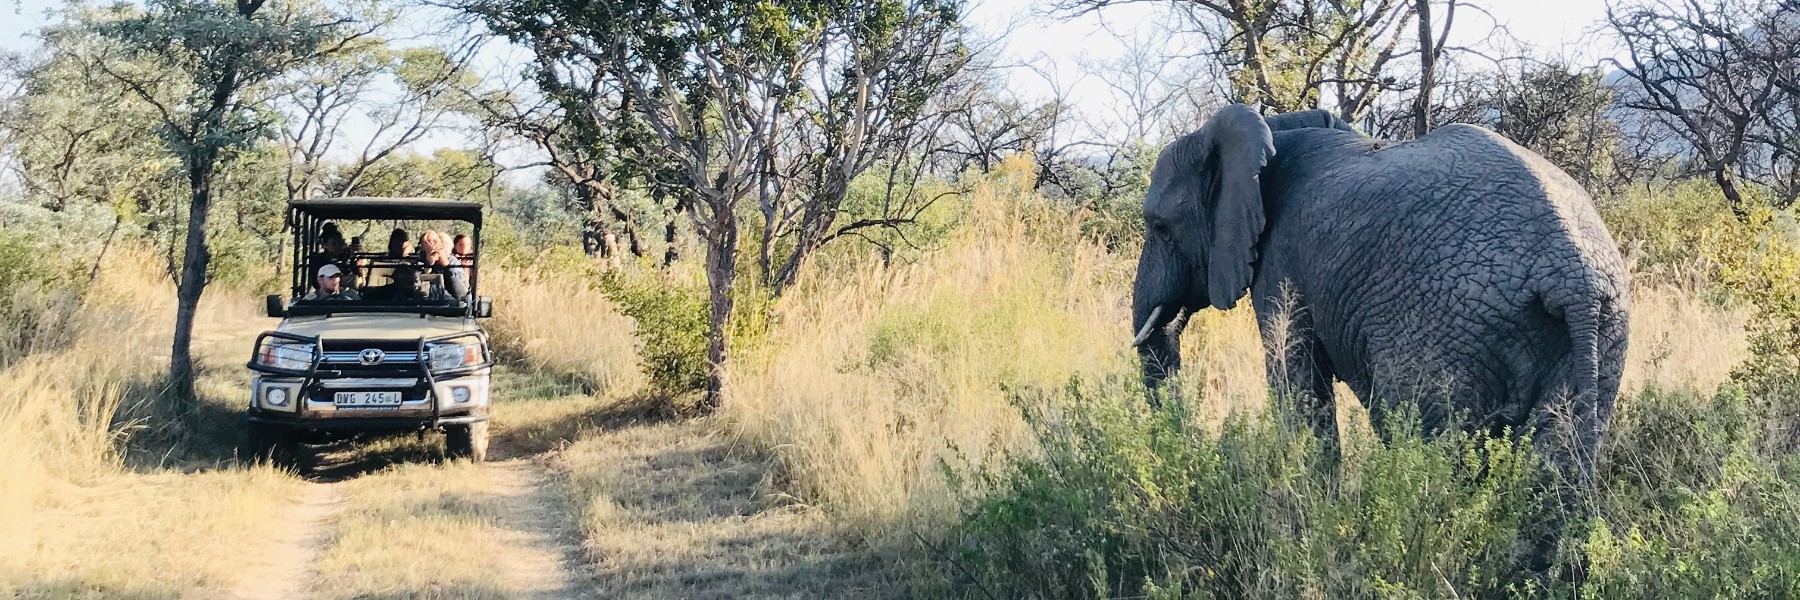 HIEP recipients in Africa - Rebecca Richter's photo of a Jeep and an elephant on a safari trip in South Africa